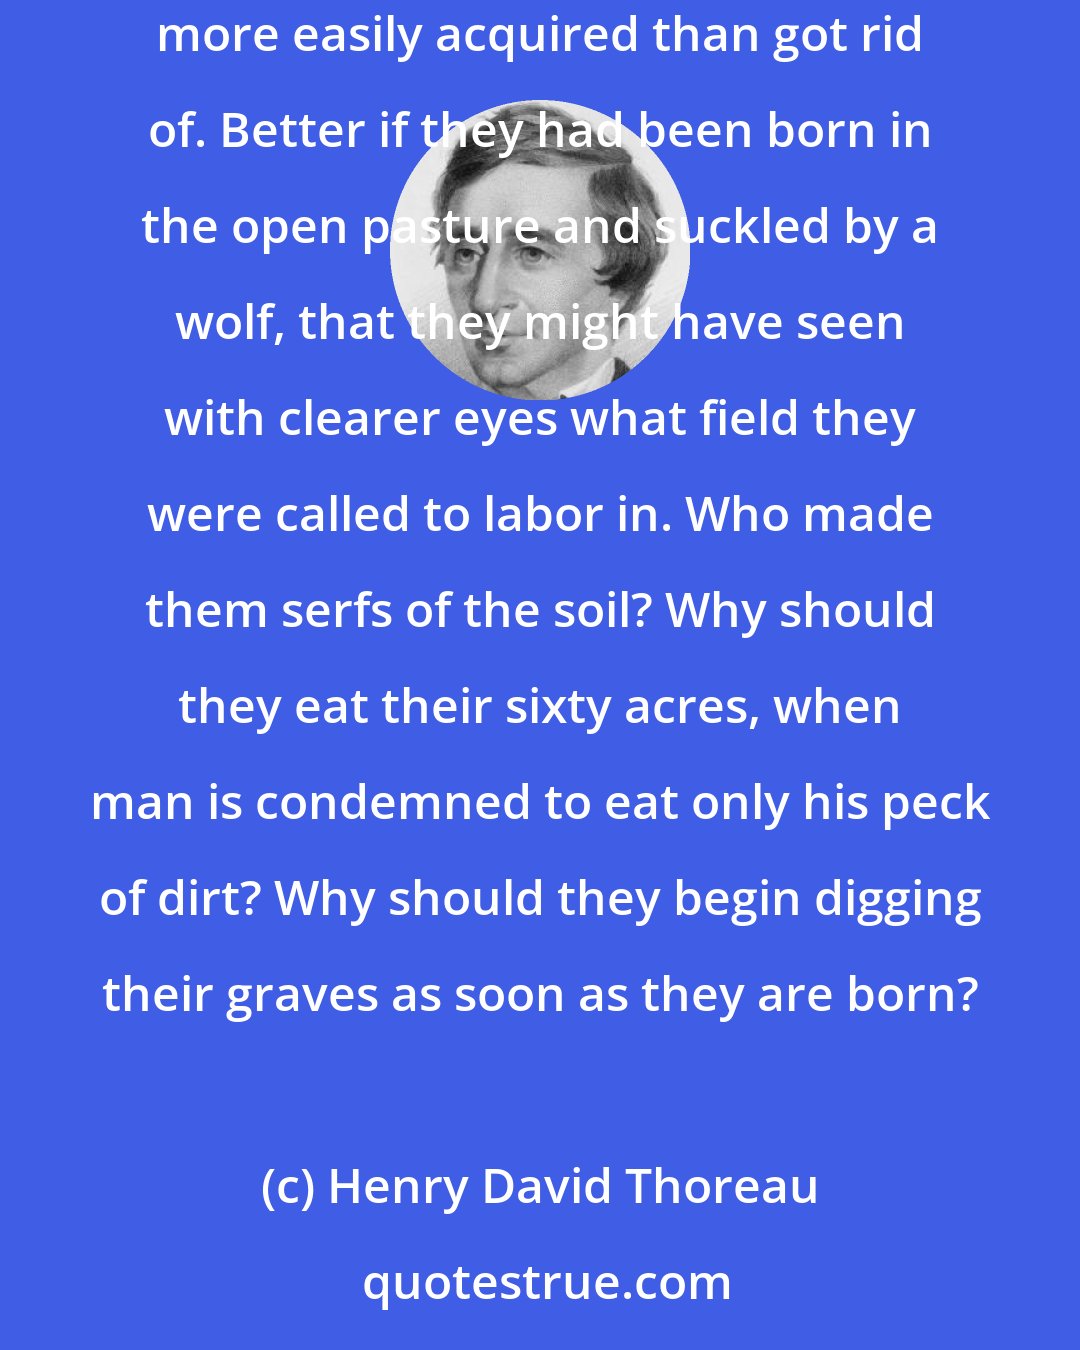 Henry David Thoreau: I see young men, my townsmen, whose misfortune it is to have inherited farms, houses, barns, cattle, and farming tools; for these are more easily acquired than got rid of. Better if they had been born in the open pasture and suckled by a wolf, that they might have seen with clearer eyes what field they were called to labor in. Who made them serfs of the soil? Why should they eat their sixty acres, when man is condemned to eat only his peck of dirt? Why should they begin digging their graves as soon as they are born?